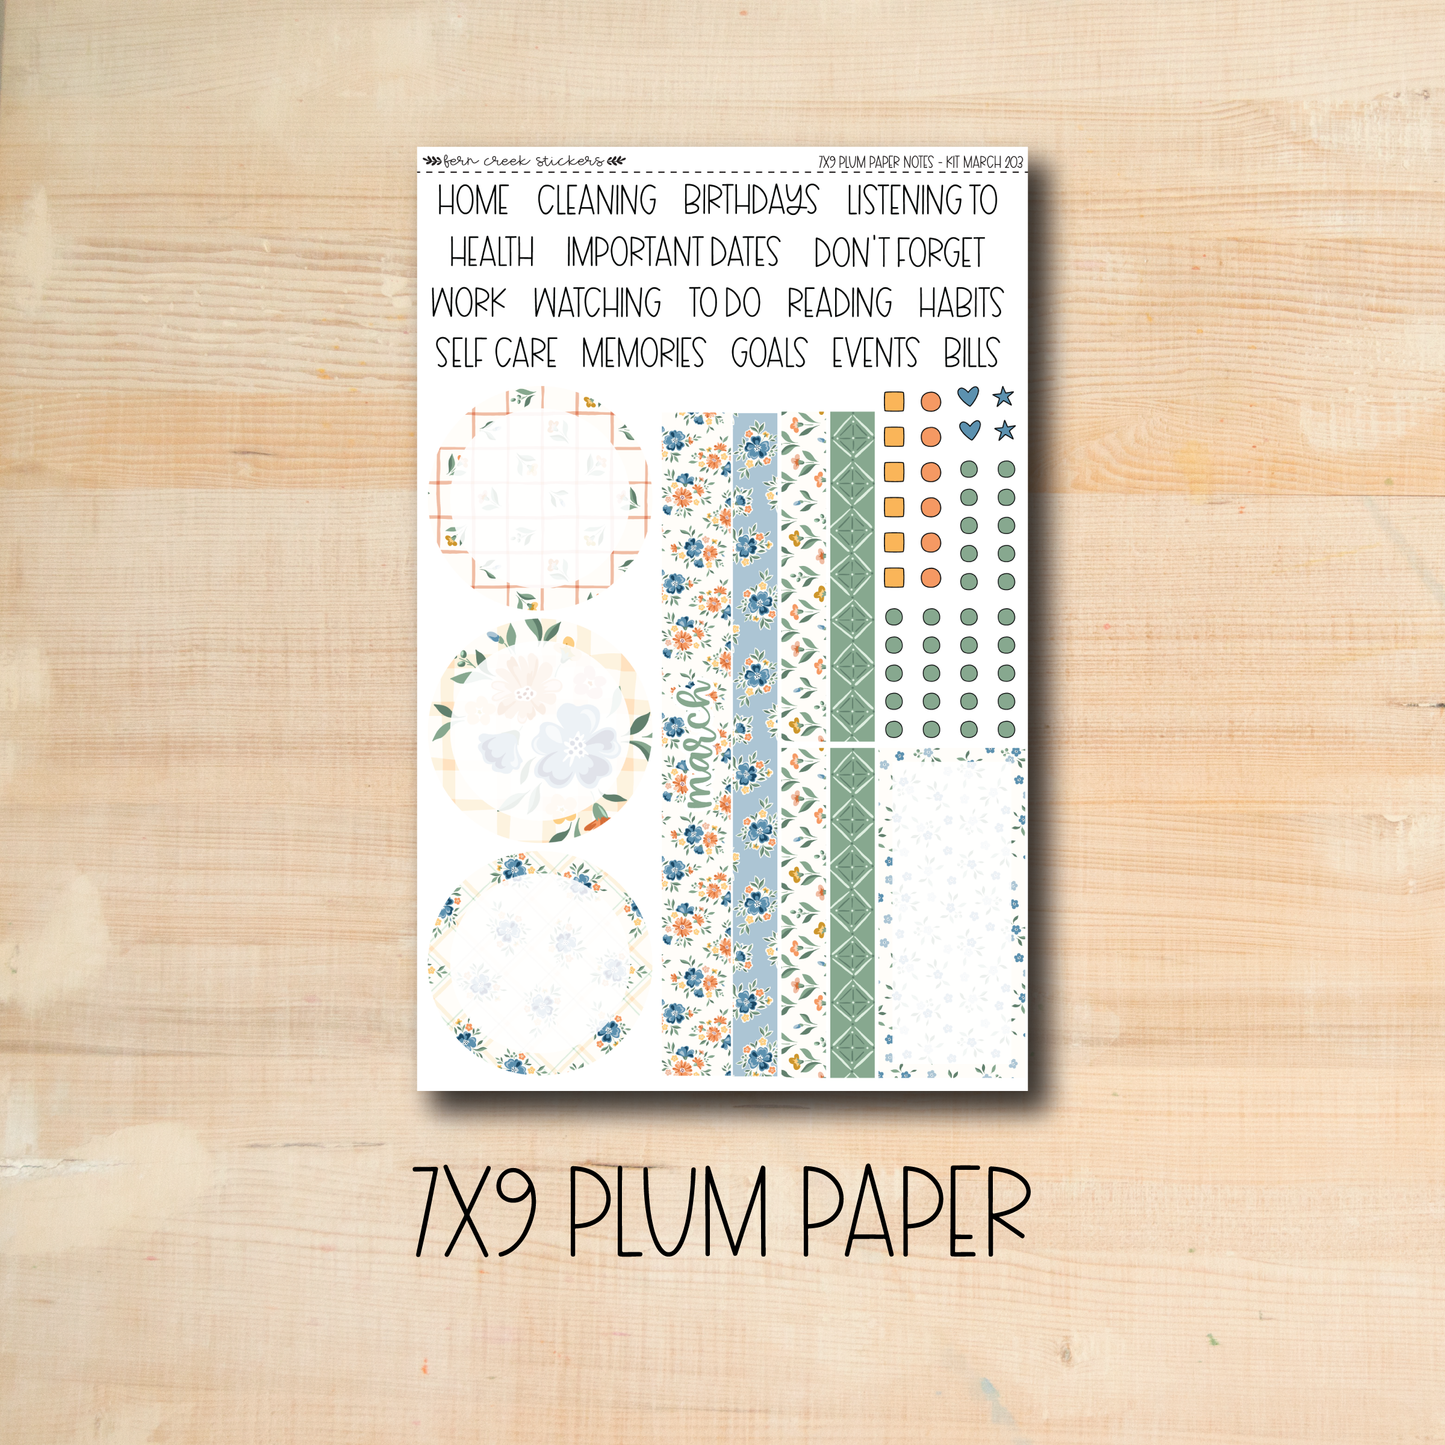 7x9 Plum NOTES-203 || IN BLOOM 7x9 Plum Paper March notes page